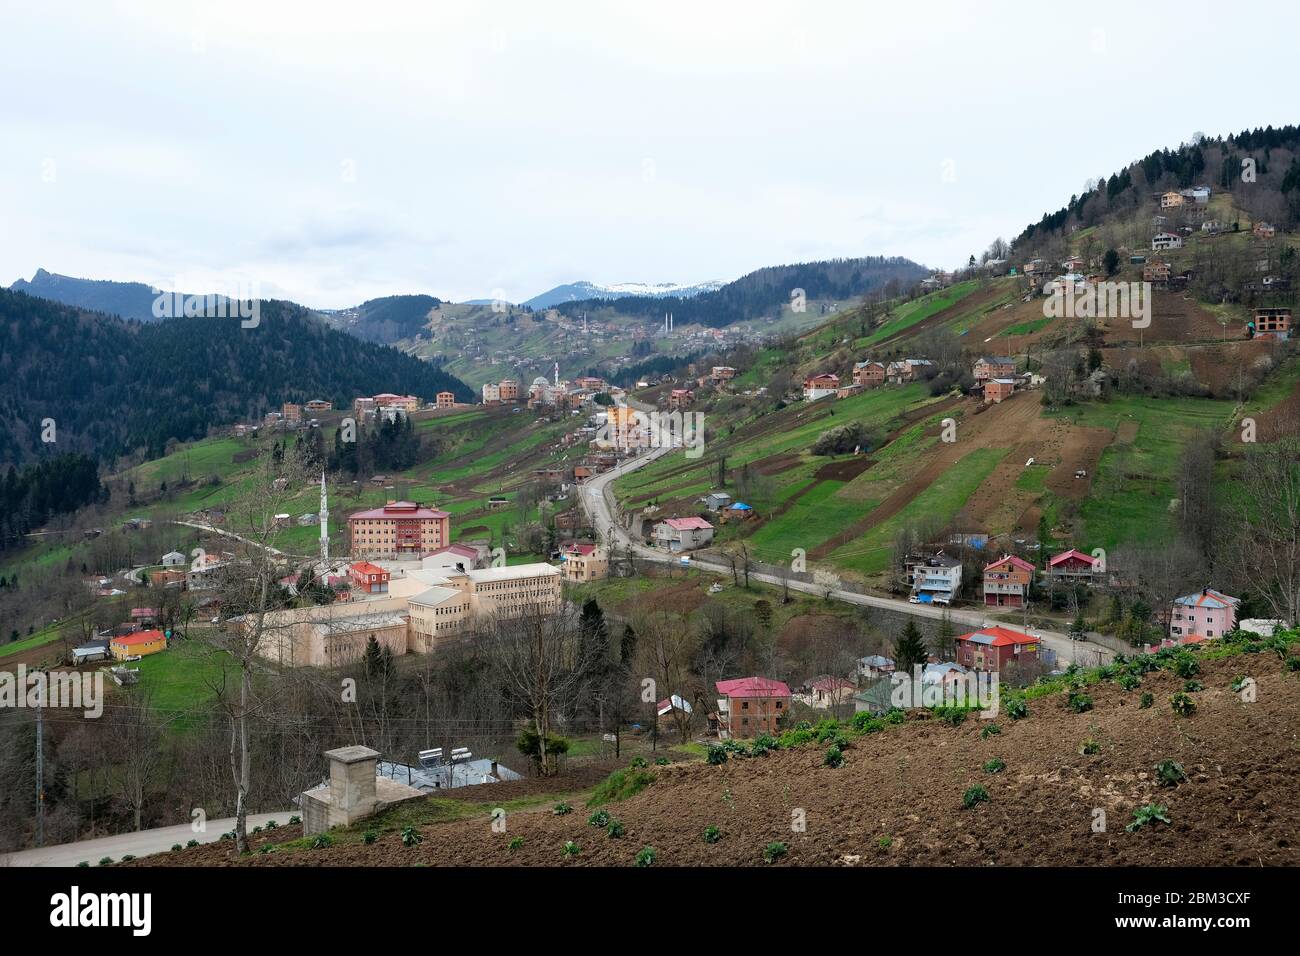 A typical village settlement in the forests of Trabzon province Stock Photo